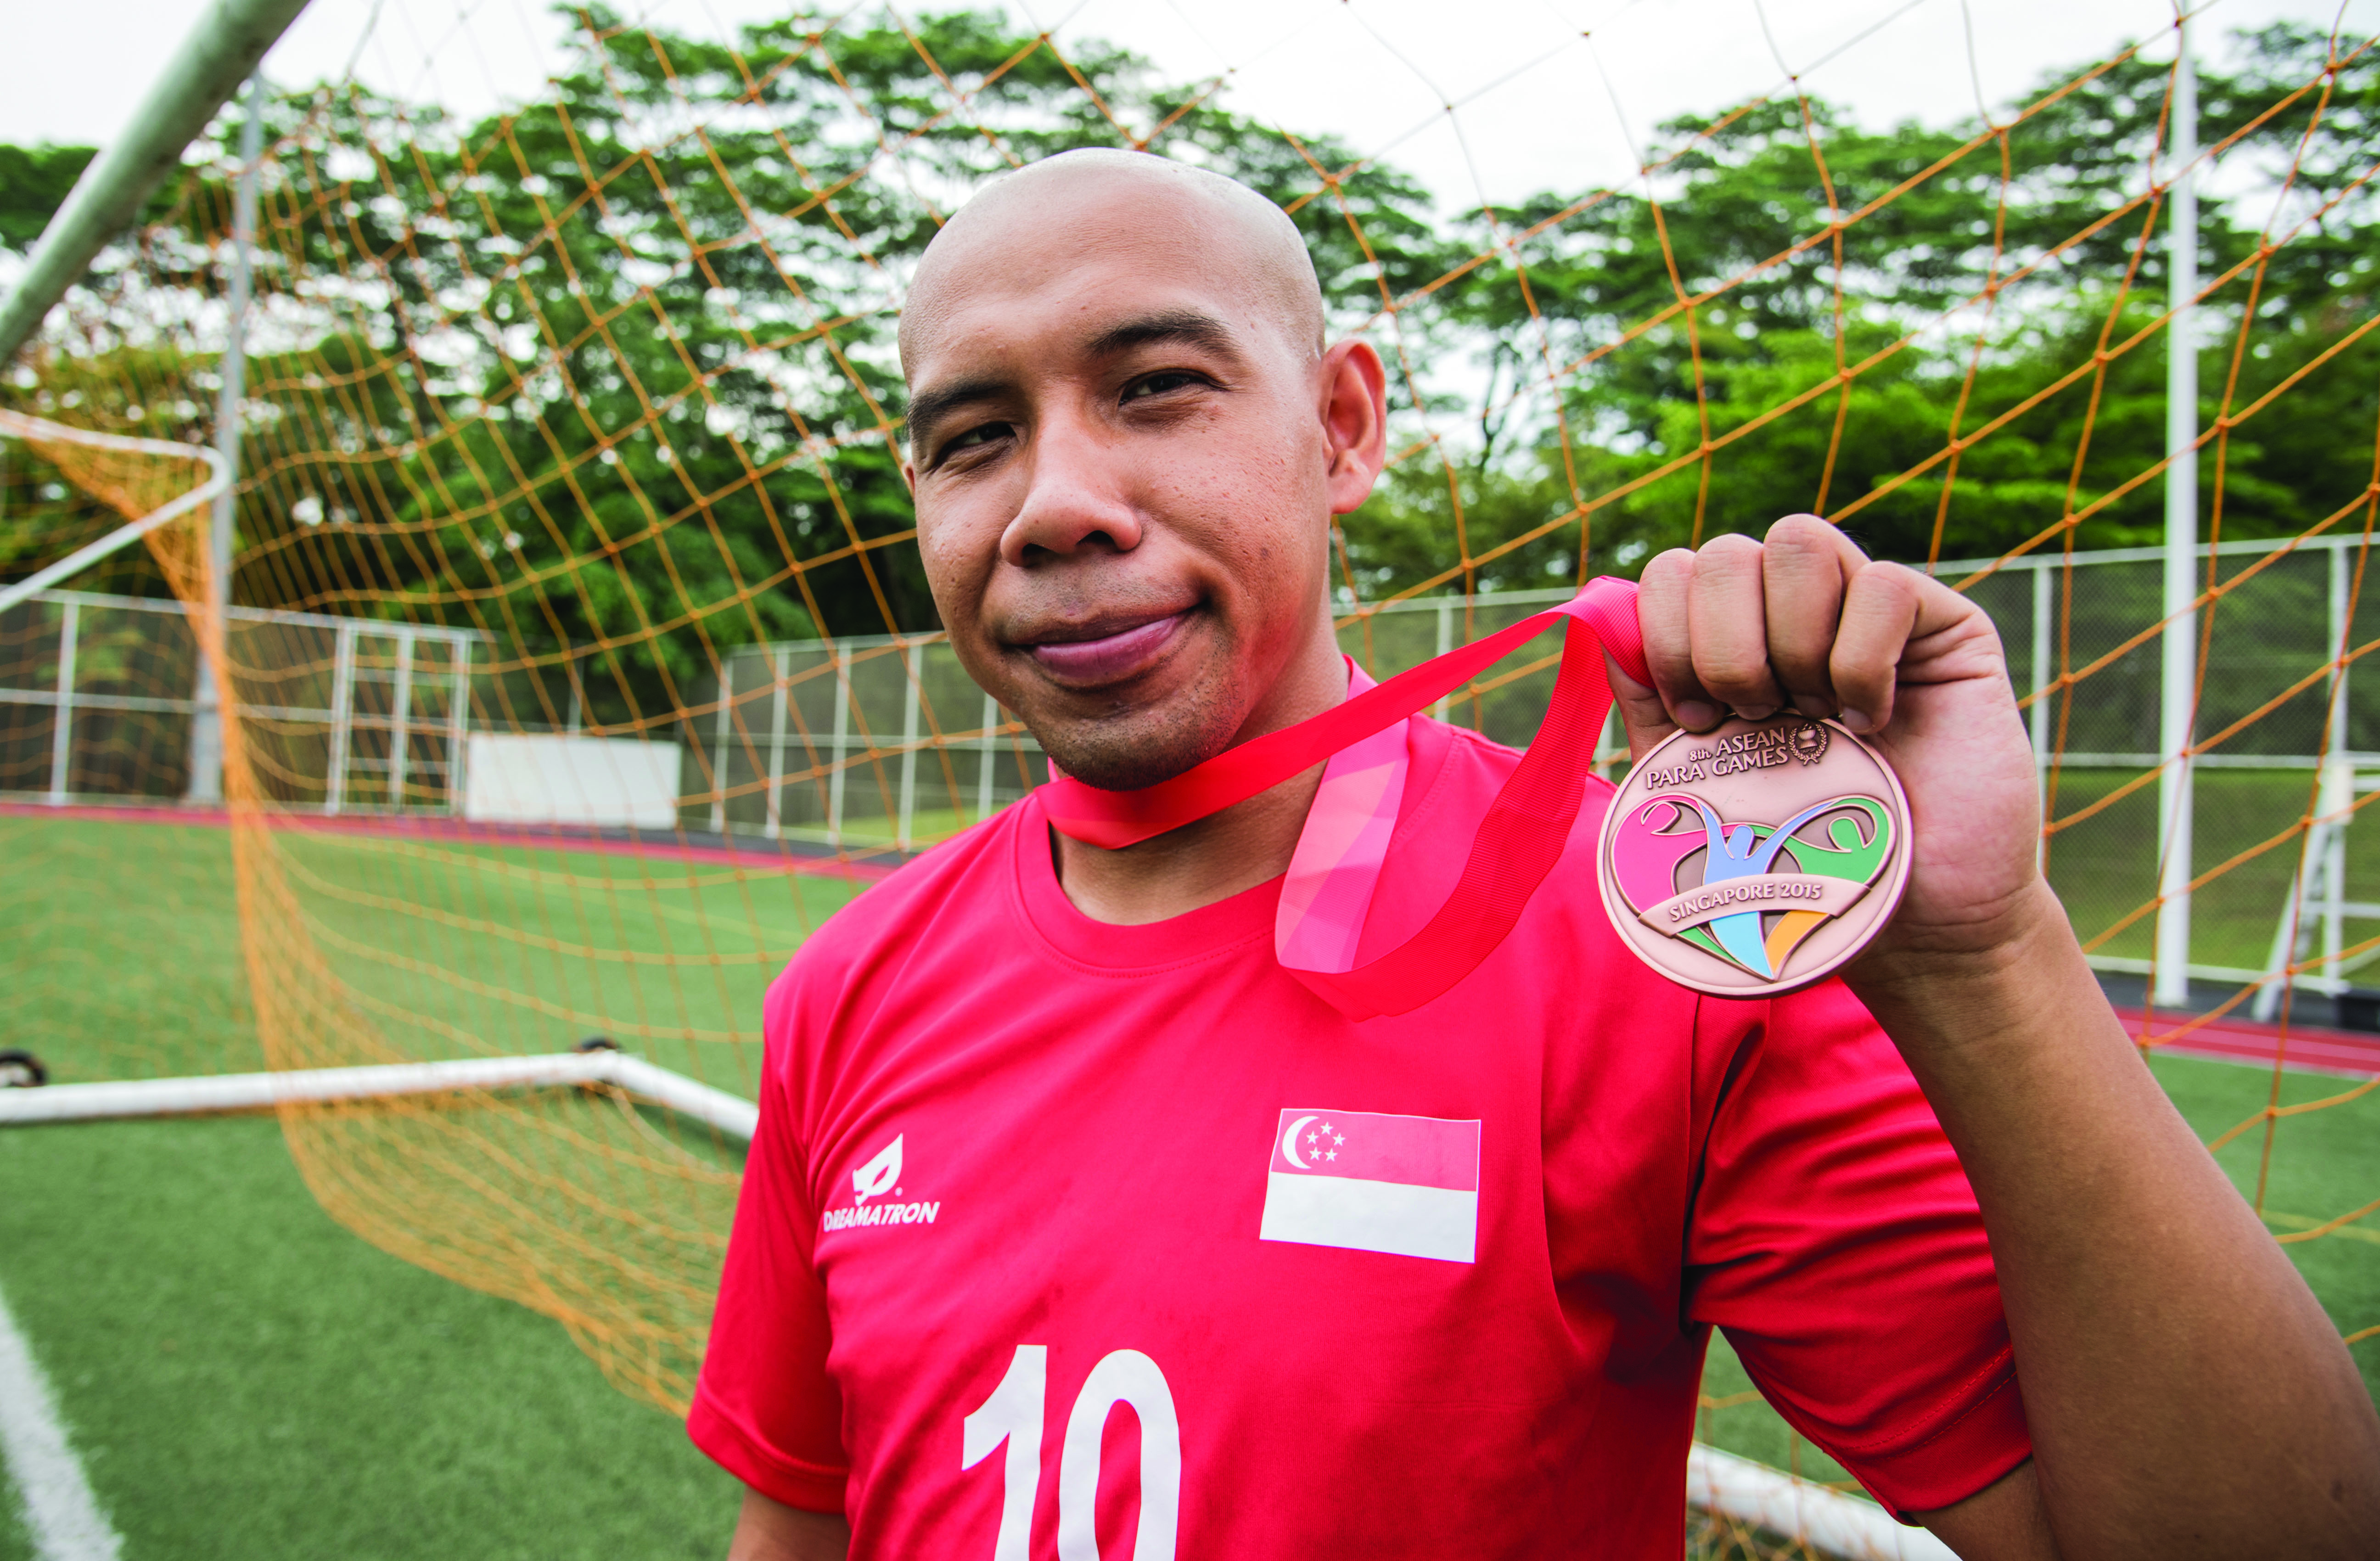 INTO THE HISTORY BOOKS: Being the first Singaporean to score a hat-trick at the new National Stadium, Khairul Anwar, 29, has overcome disability to become a cult hero in local football. PHOTO: Ken Lu